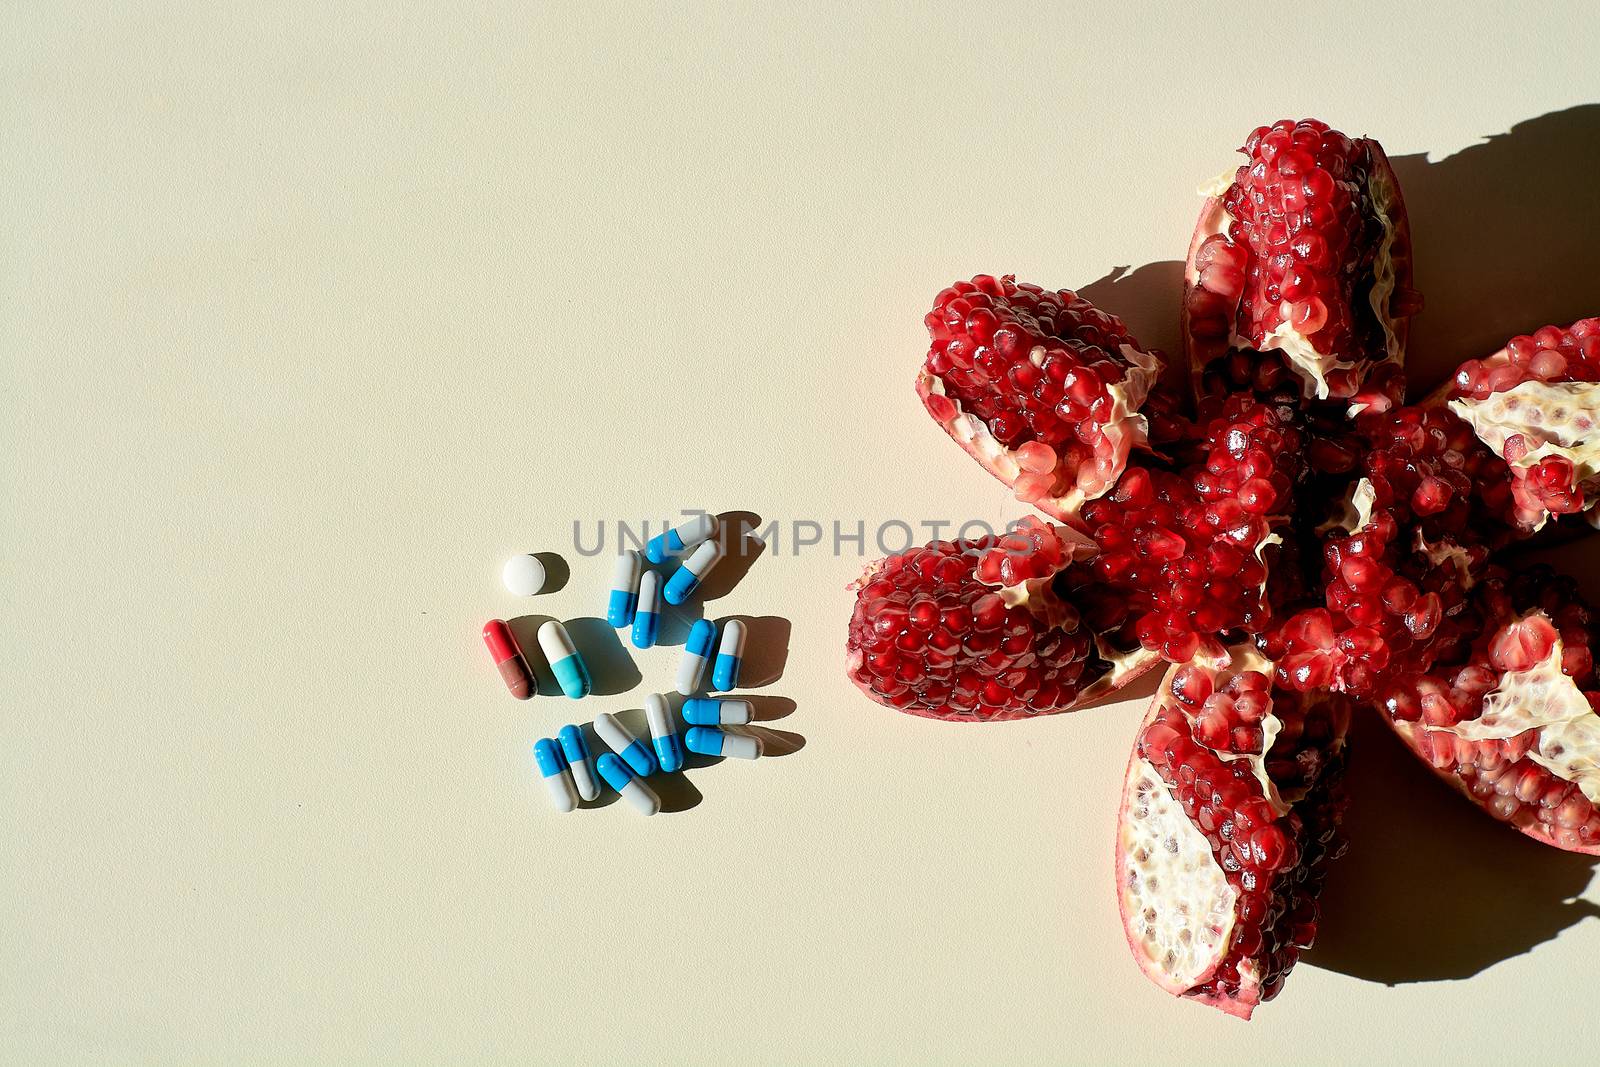 Garnet. Tablets and capsules, pills. The concept of a healthy life. Ripe red juicy pomegranate and pills, capsules, pills lying separately on a white background. Grains pomegranate fruit.